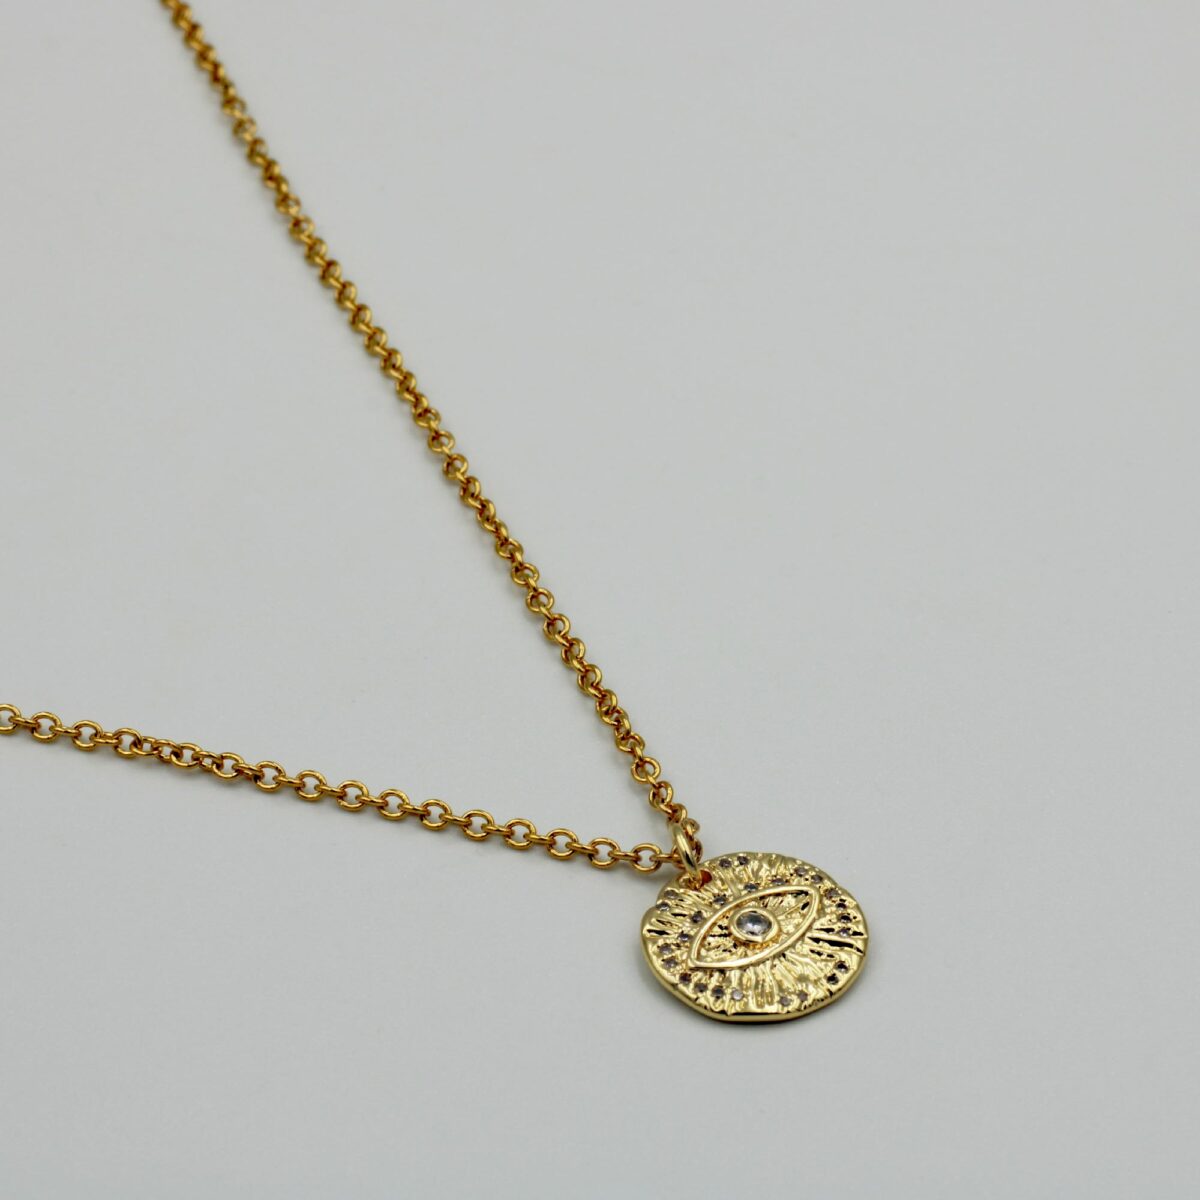 24k Gold Plated Necklace with Eye Shape and Zircon Stones